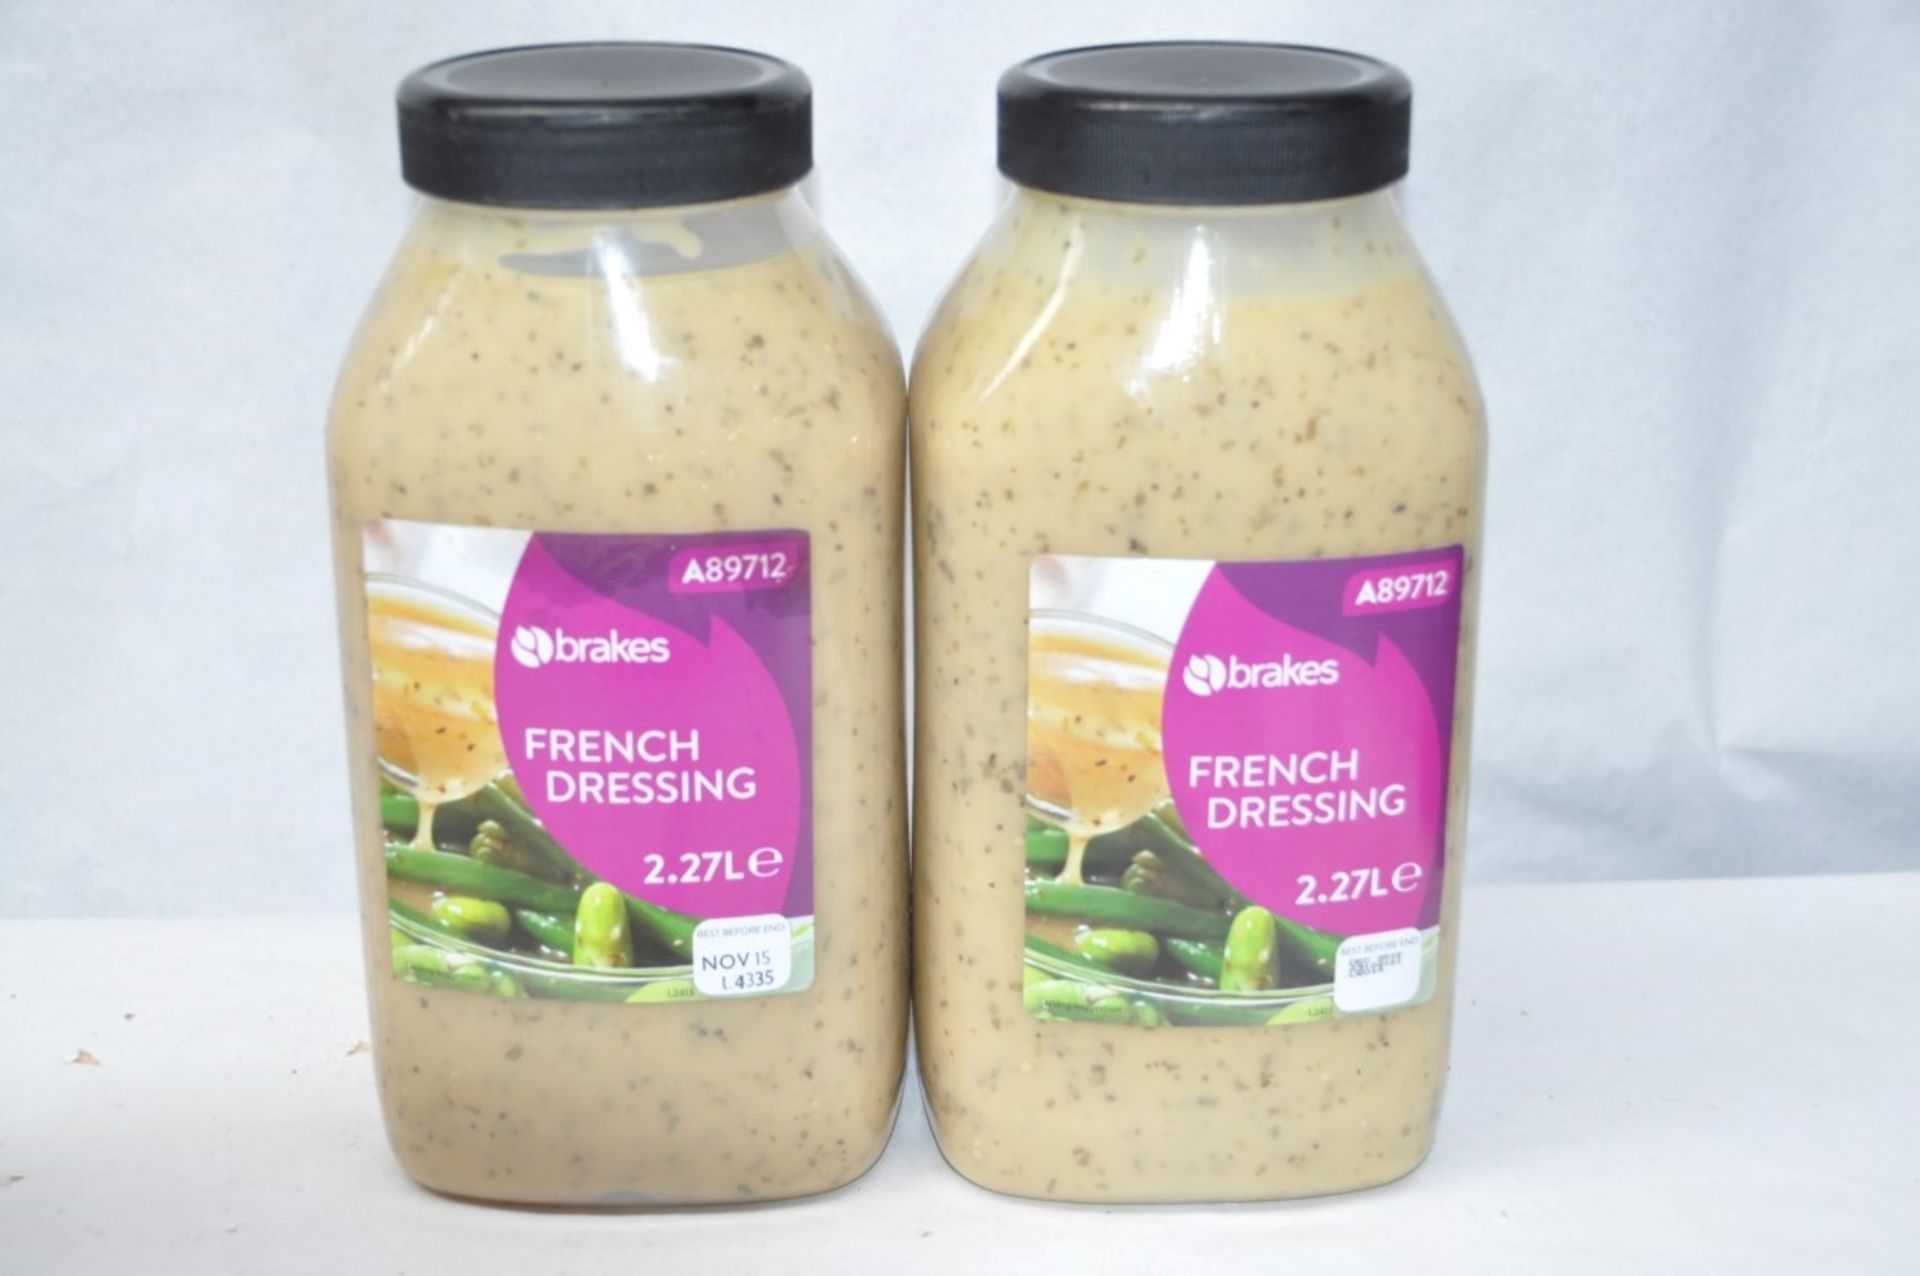 2 x Catering Tubs of "Brakes" French Dressing - 2.27 Litres Each - Best Before Nov 2015 - Unused